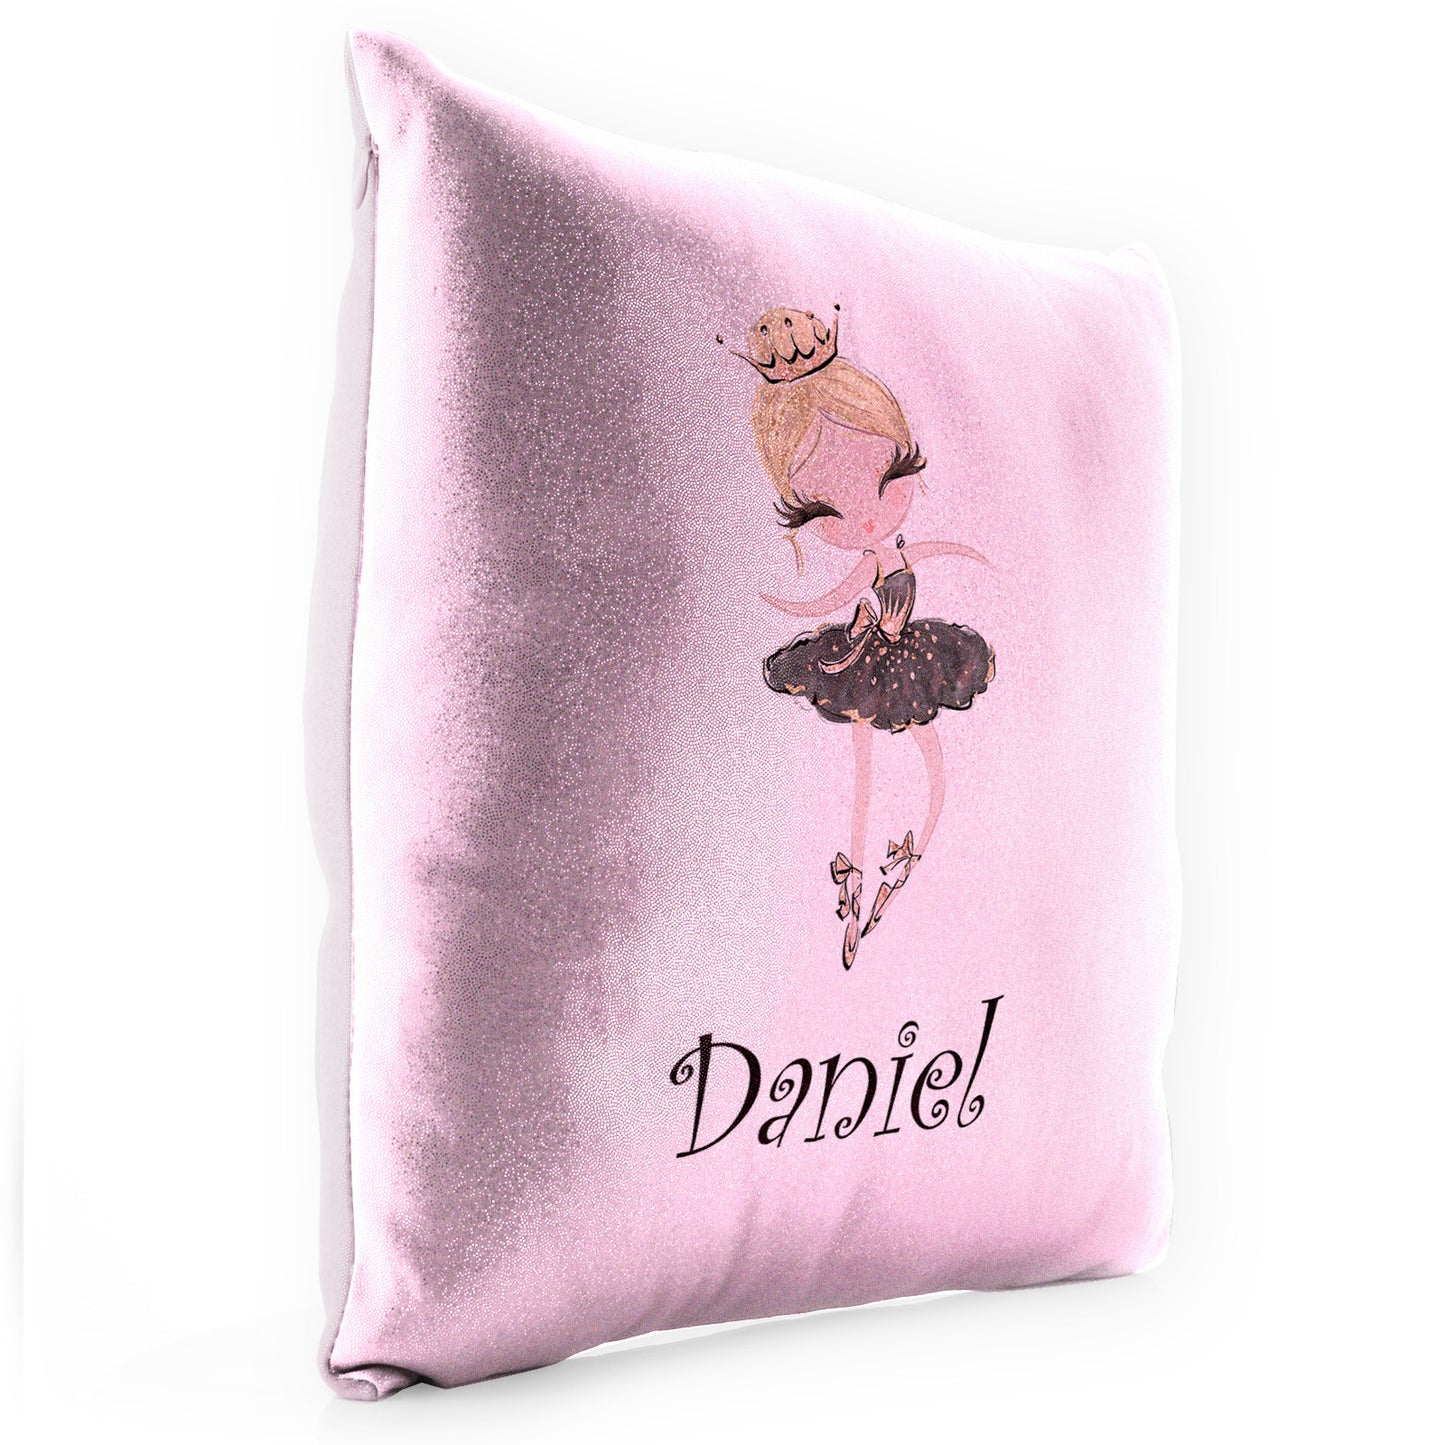 Personalised Glitter Cushion with Cute Text and Blonde Hair Black Dress Tiara Ballerina